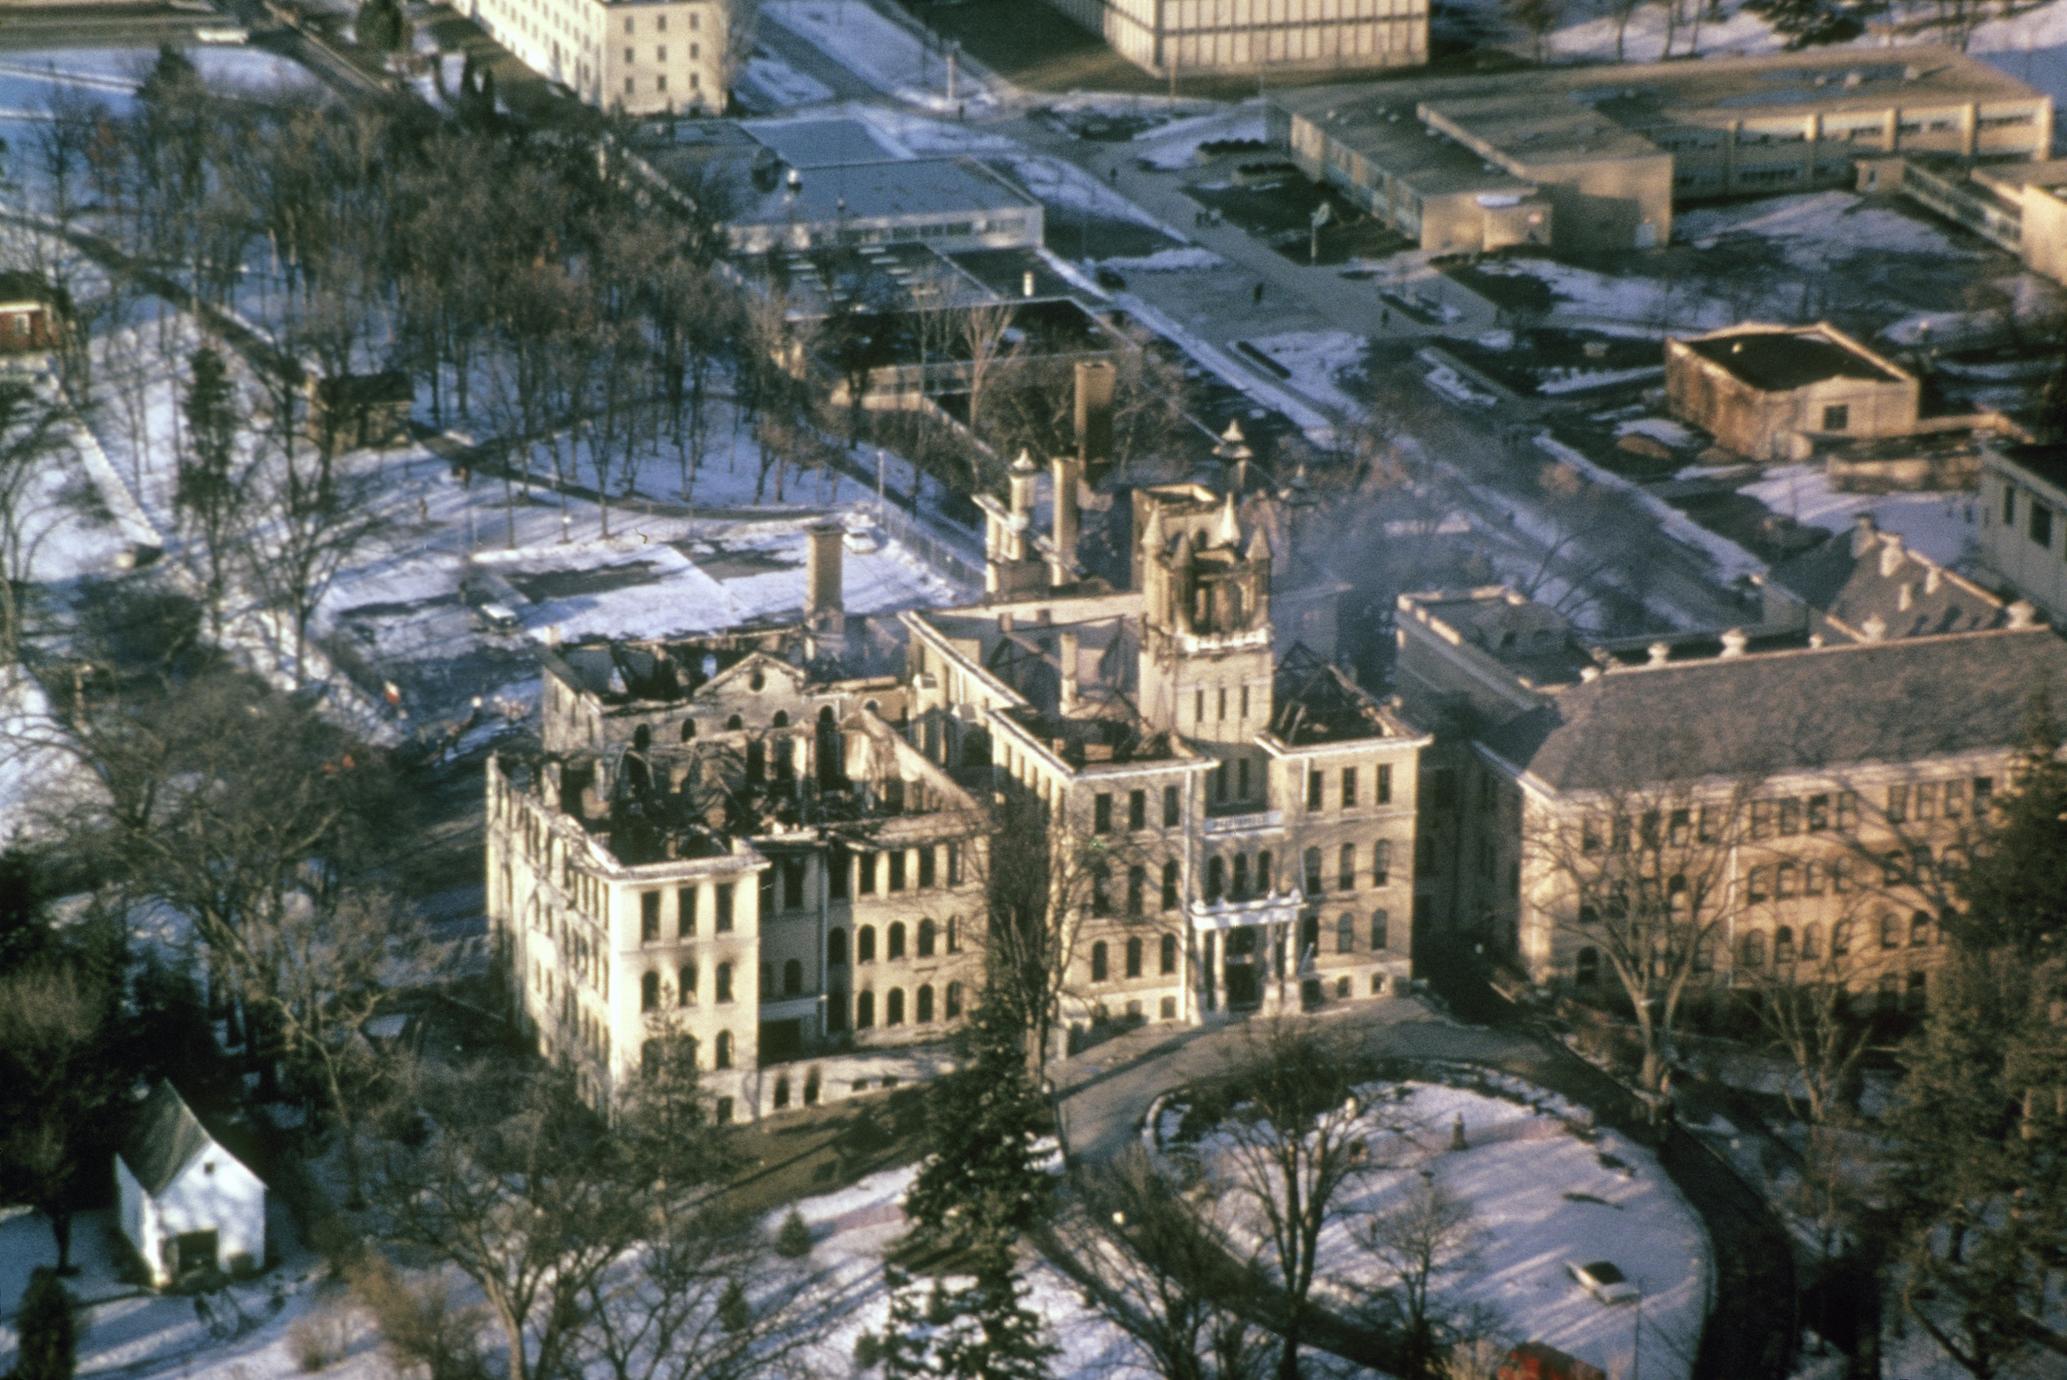 Old Main After the Fire